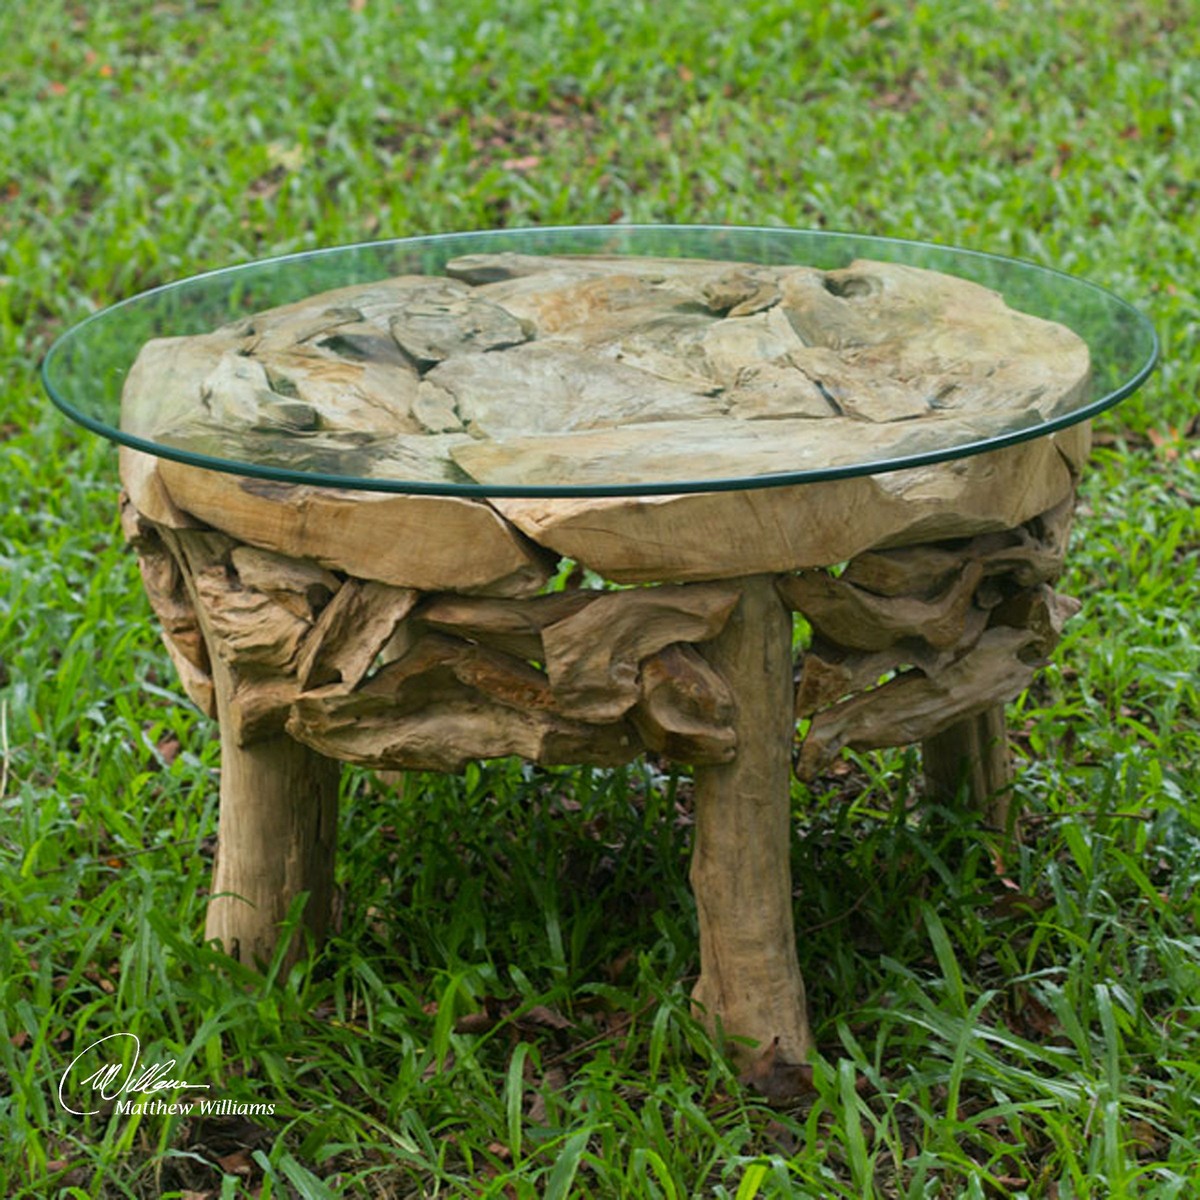 Uttermost Teak Root Round Coffee Table